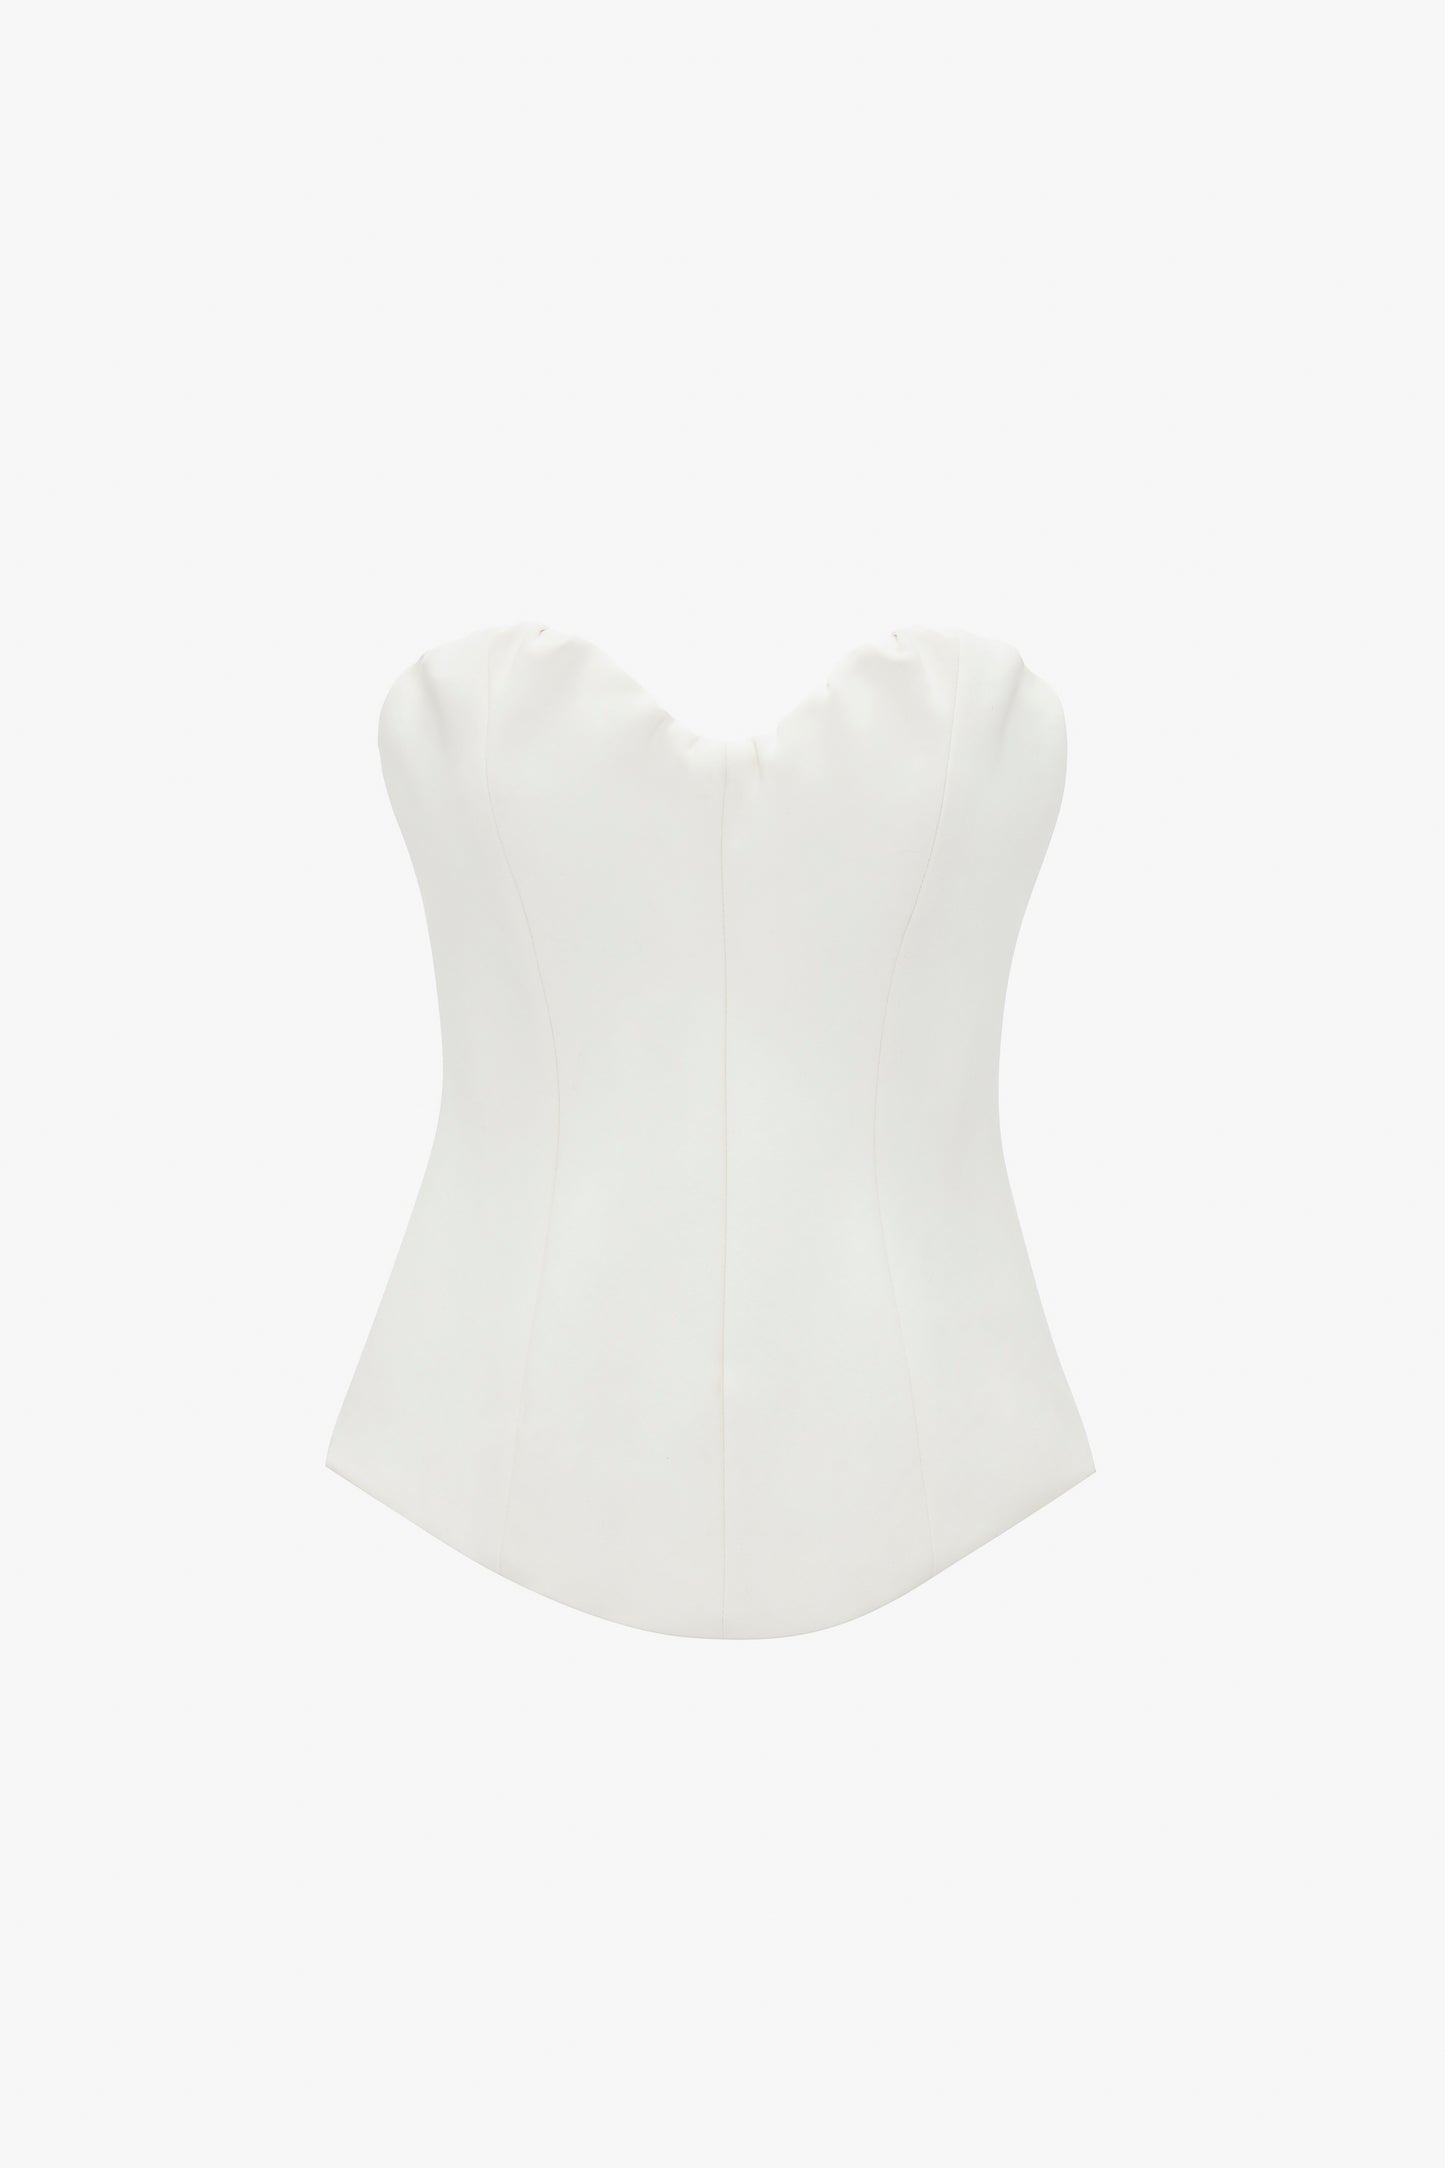 White strapless Corset Top In Antique White with a sweetheart neckline on a white background by Victoria Beckham.